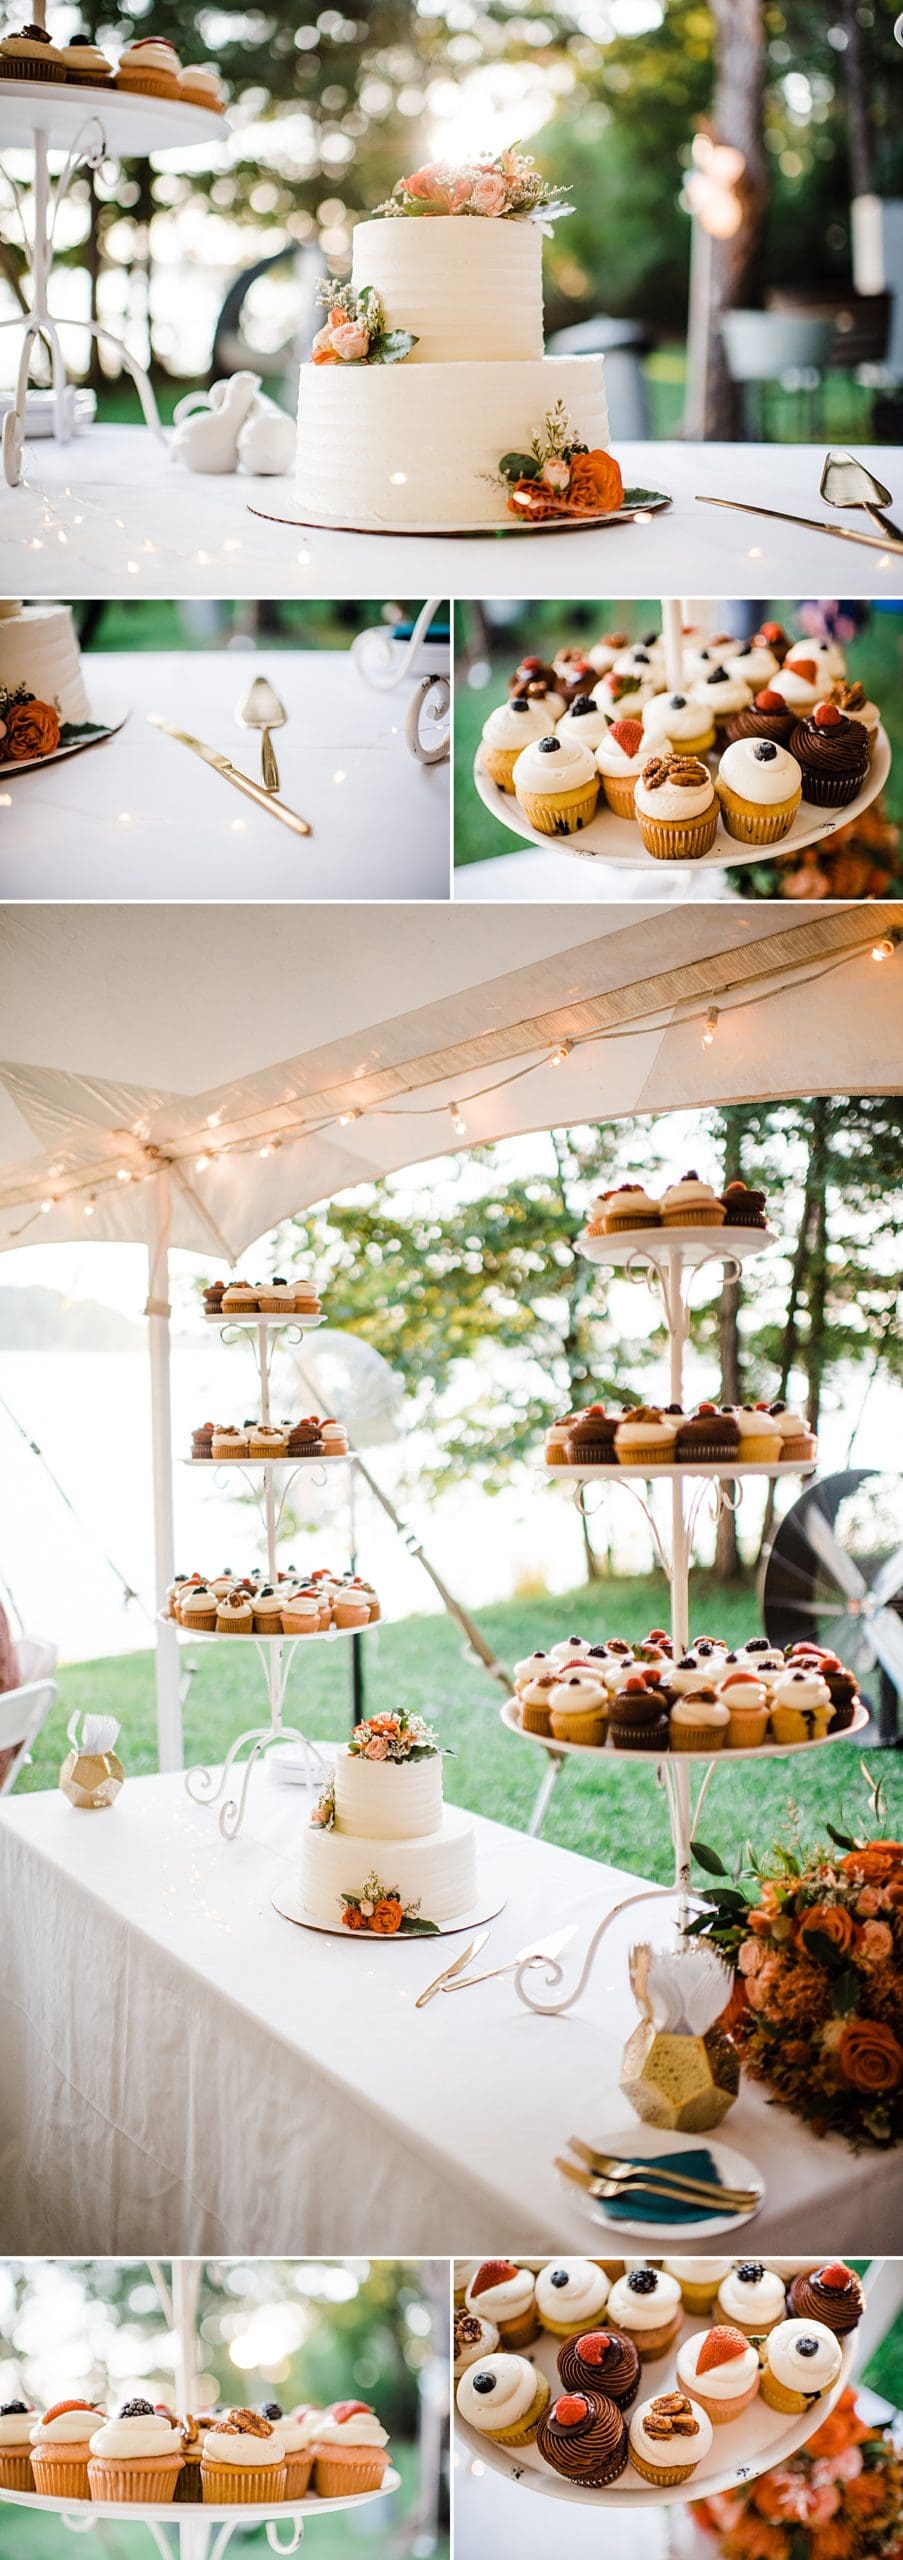 cake table with cupcakes on tiers